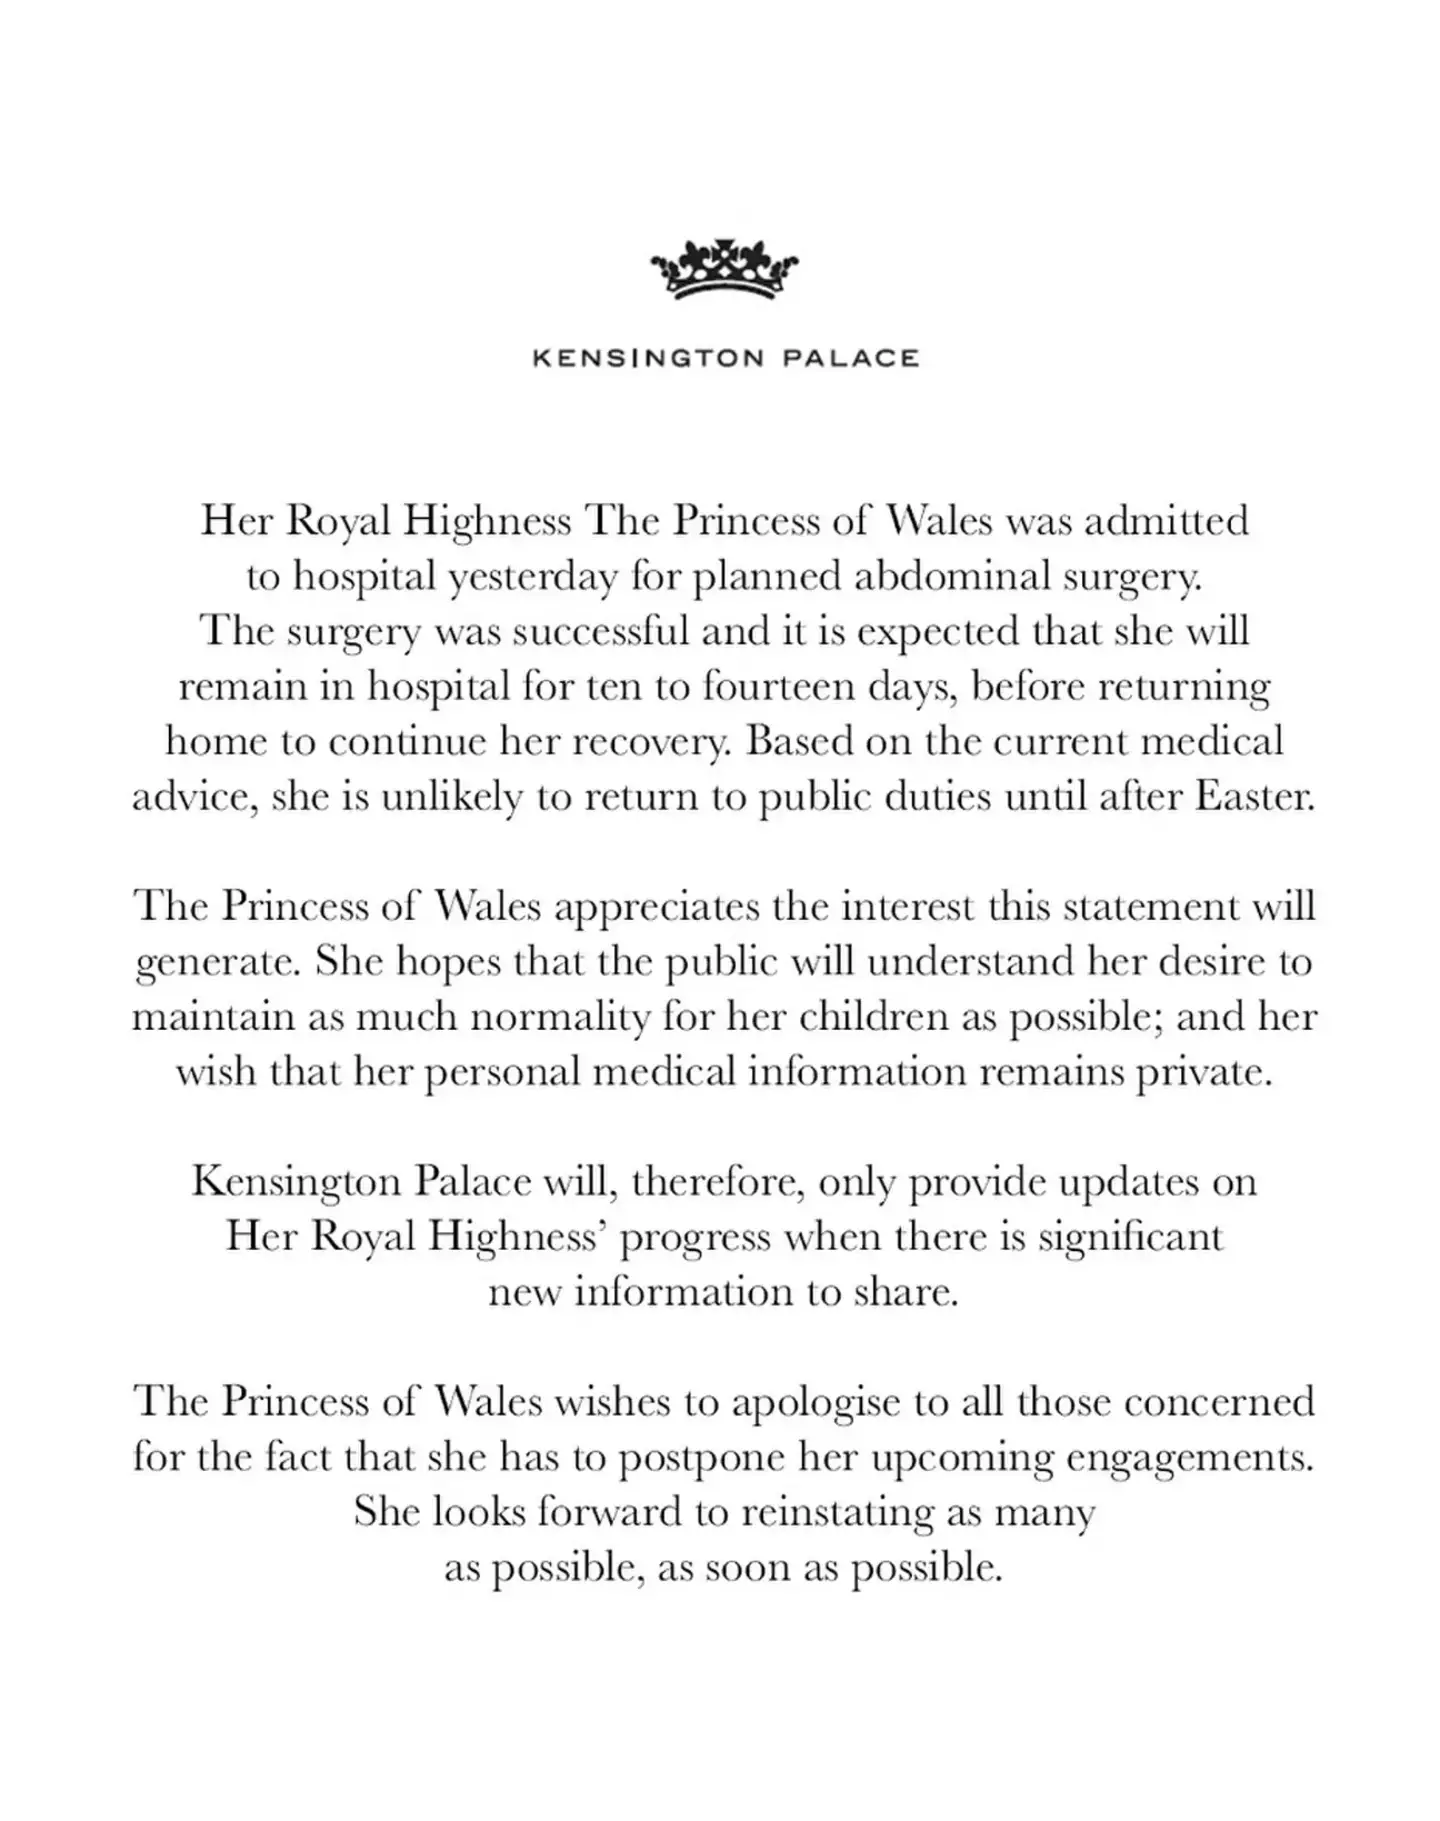 Kensington Palace released a statement about the Princess' health last month.